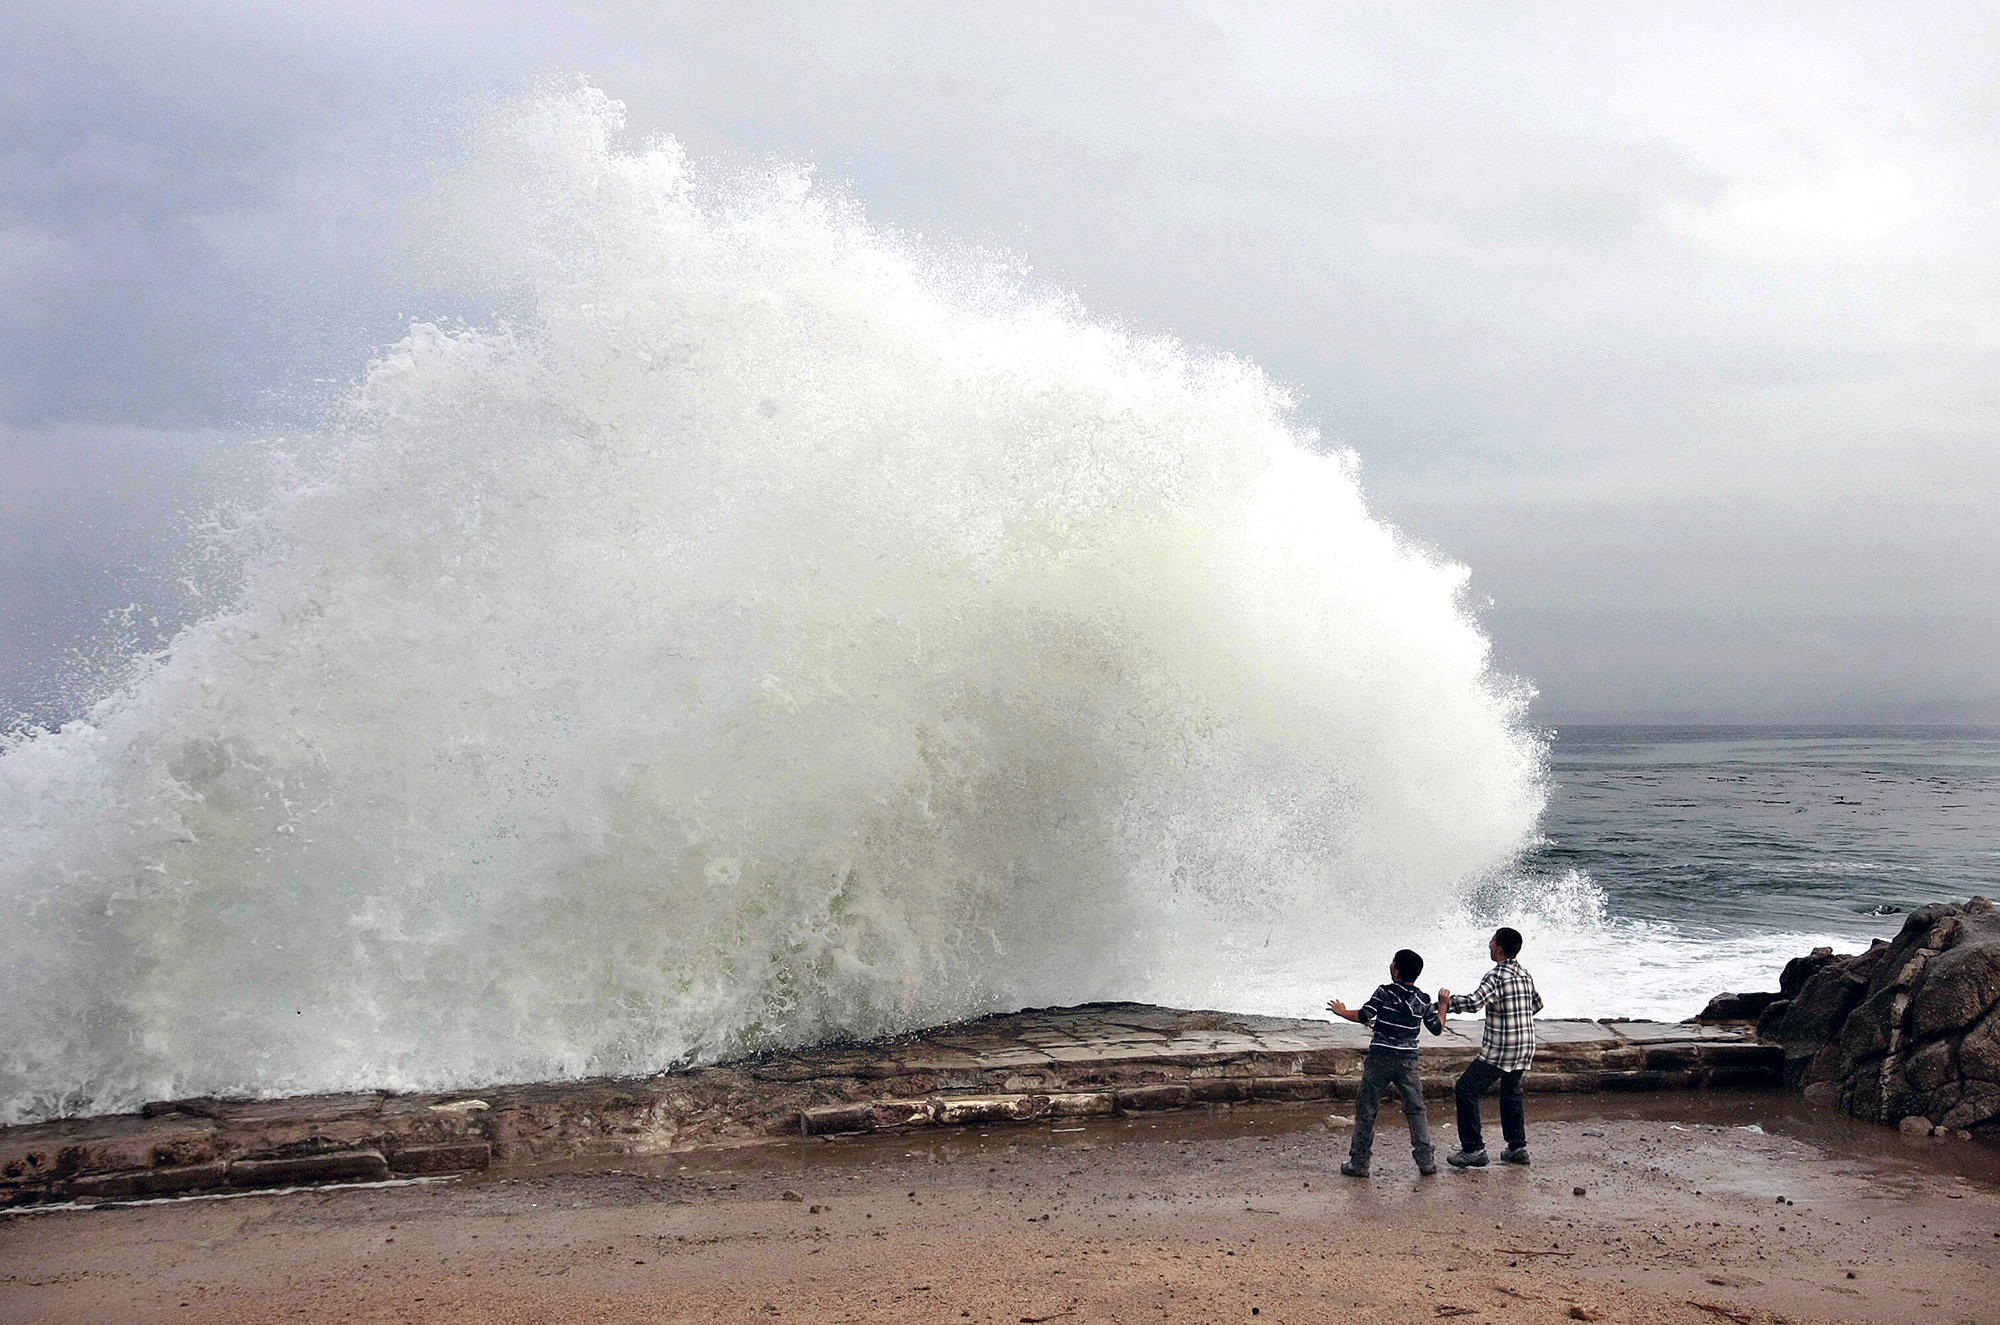 PHOTO: Aidan Stephenson,12, and Conor Stephenson,10, visiting from Phoenix, watch the waves break on Ocean View Boulevard, Dec. 10, 2014, in Pacific Grove, Calif.